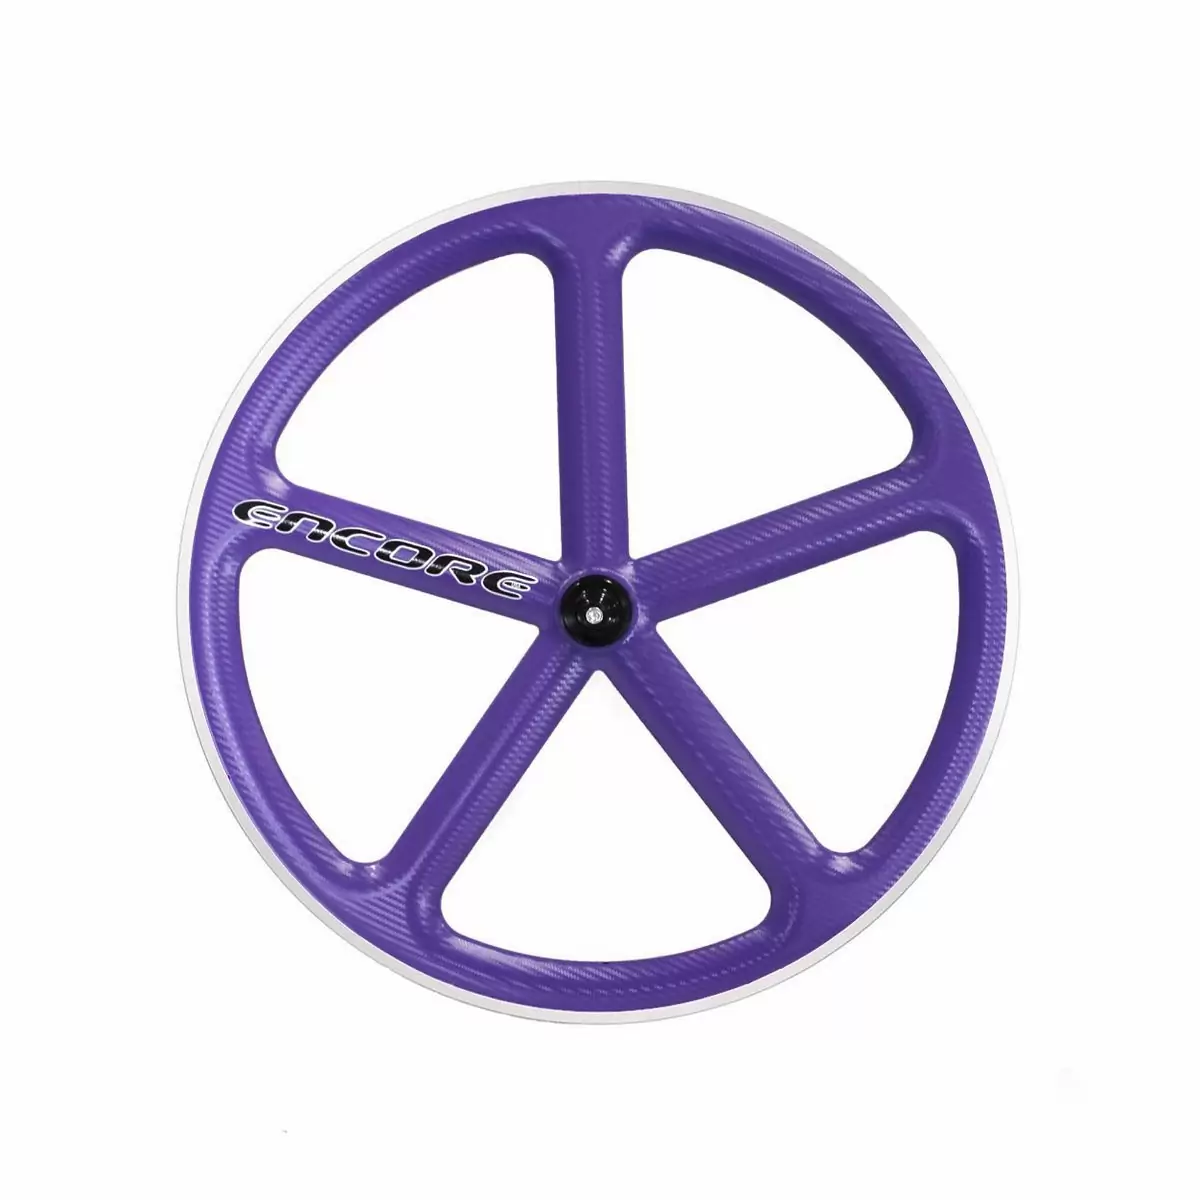 roue avant 700c track 5 rayons carbone tissage violet msw - image